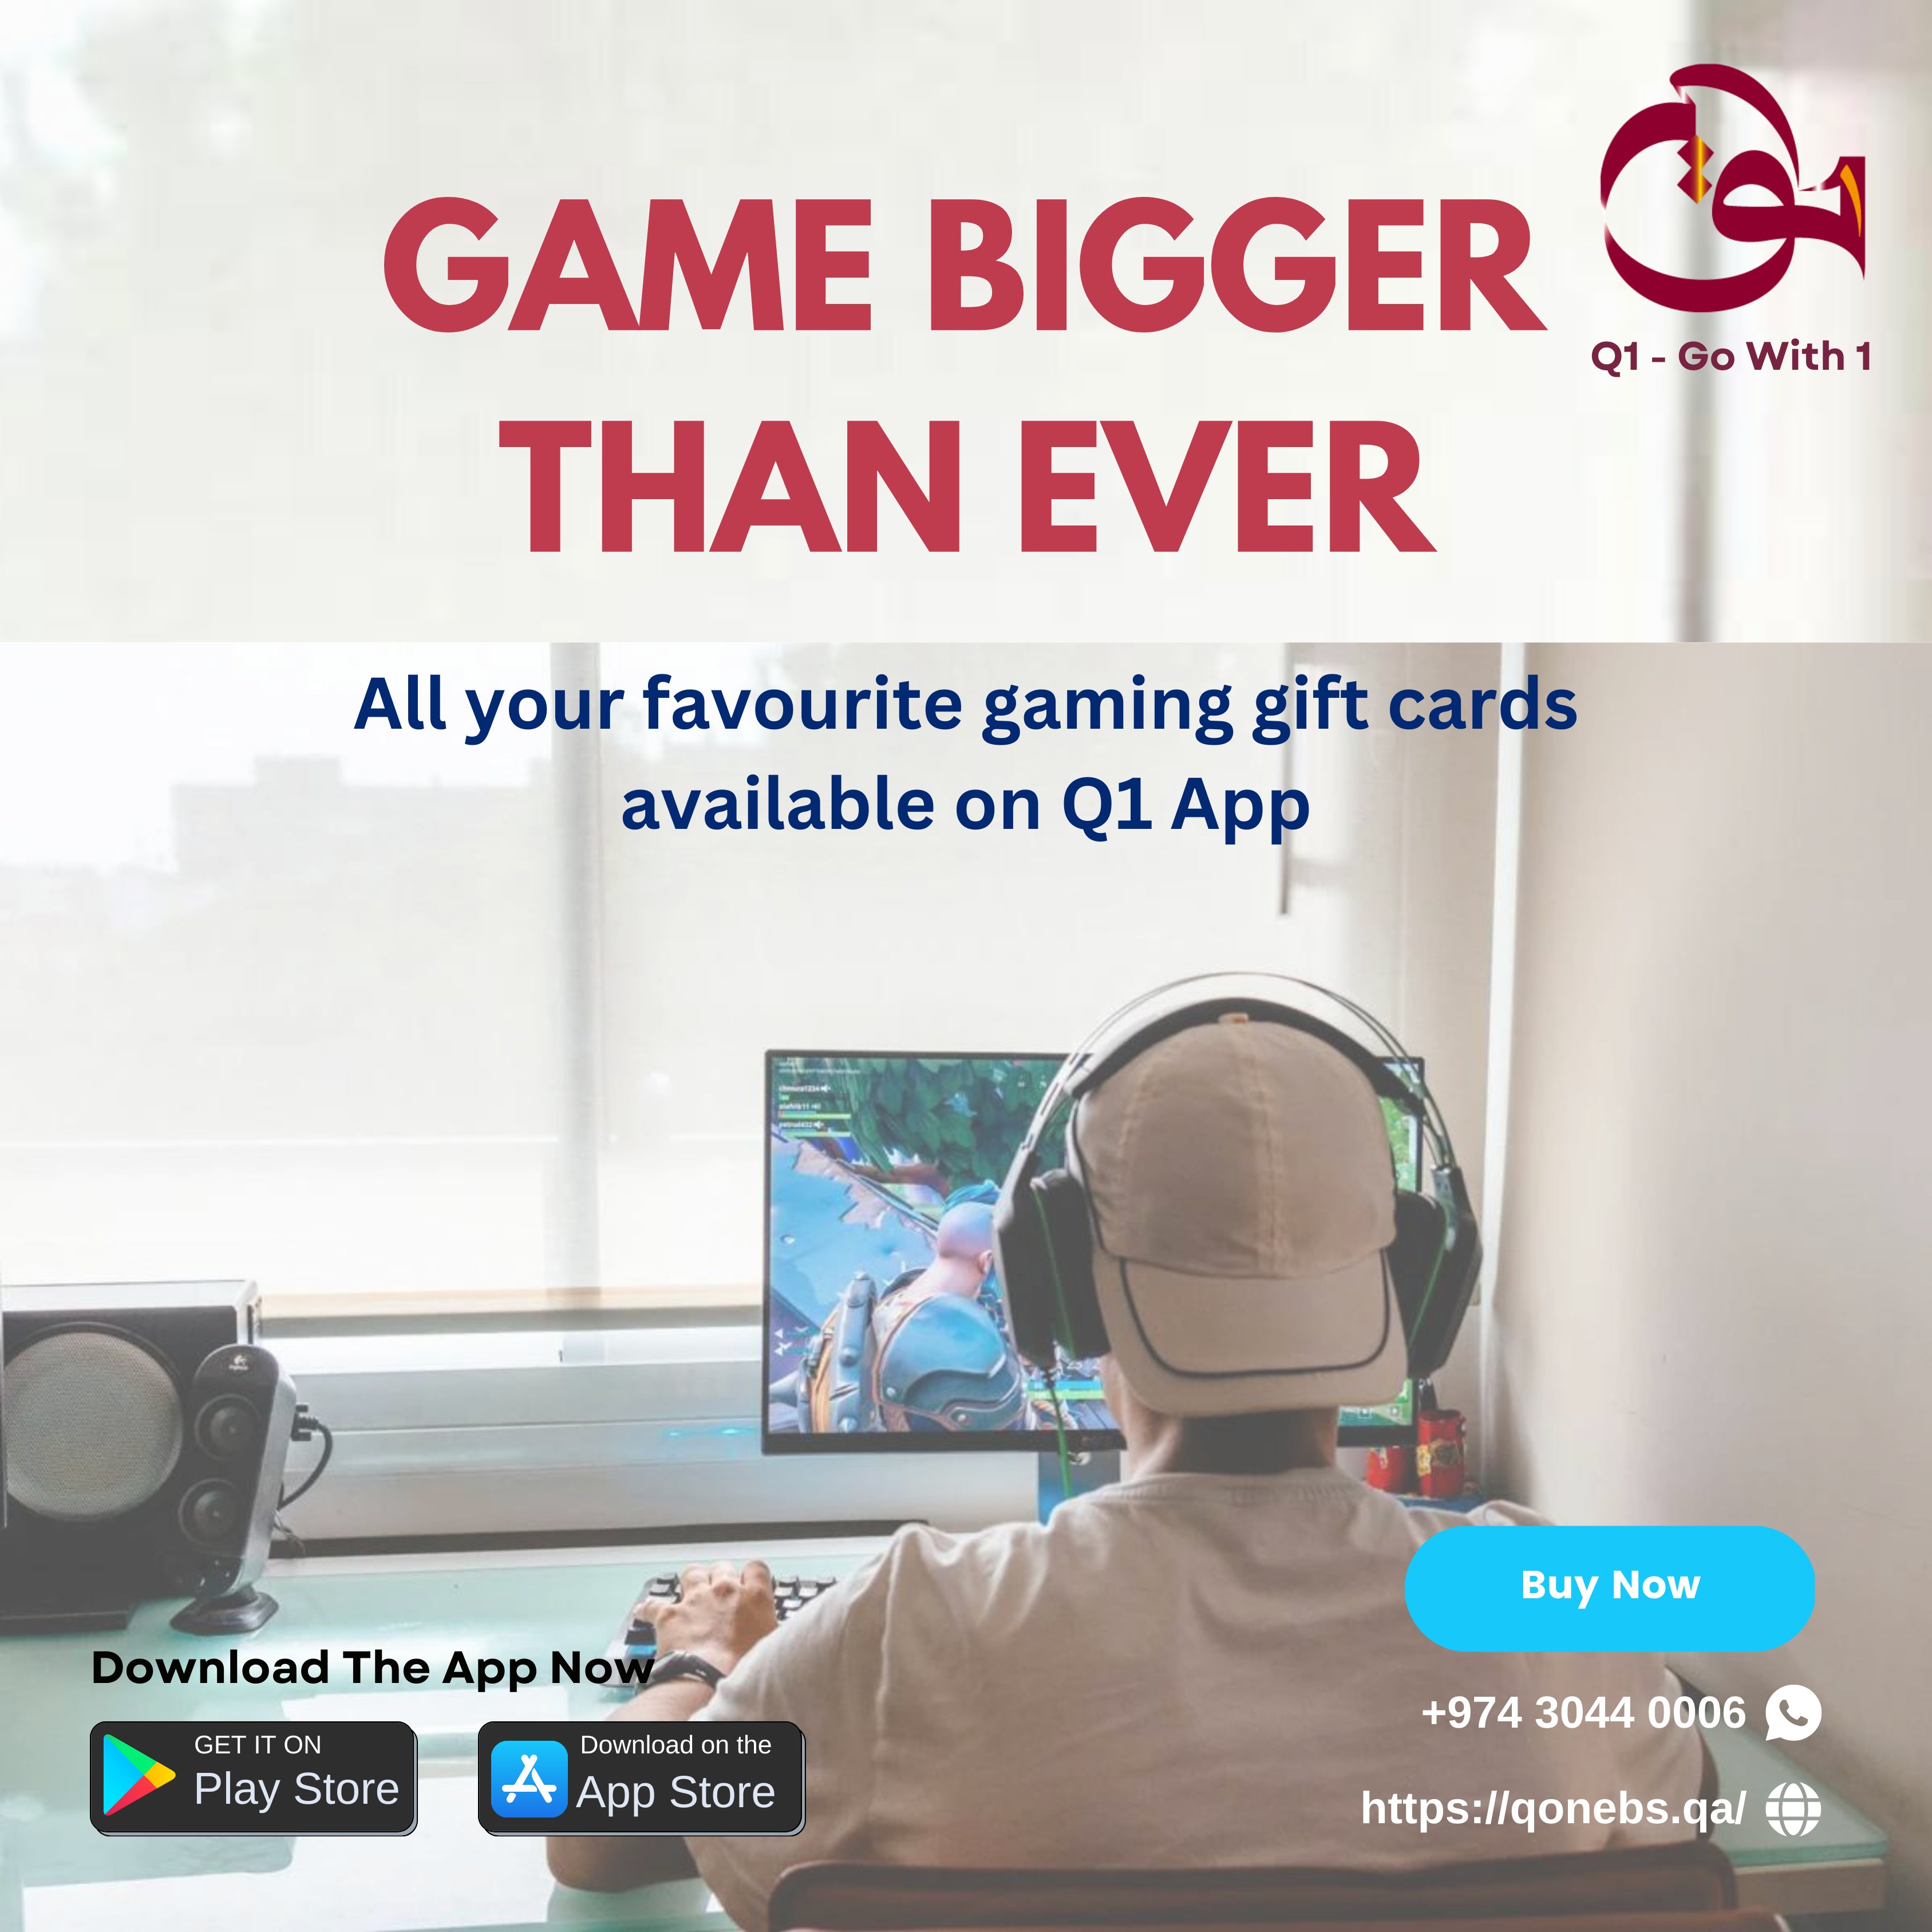 Roblox Gift Cards: Price of Roblox Cards, How to Get in Qatar?